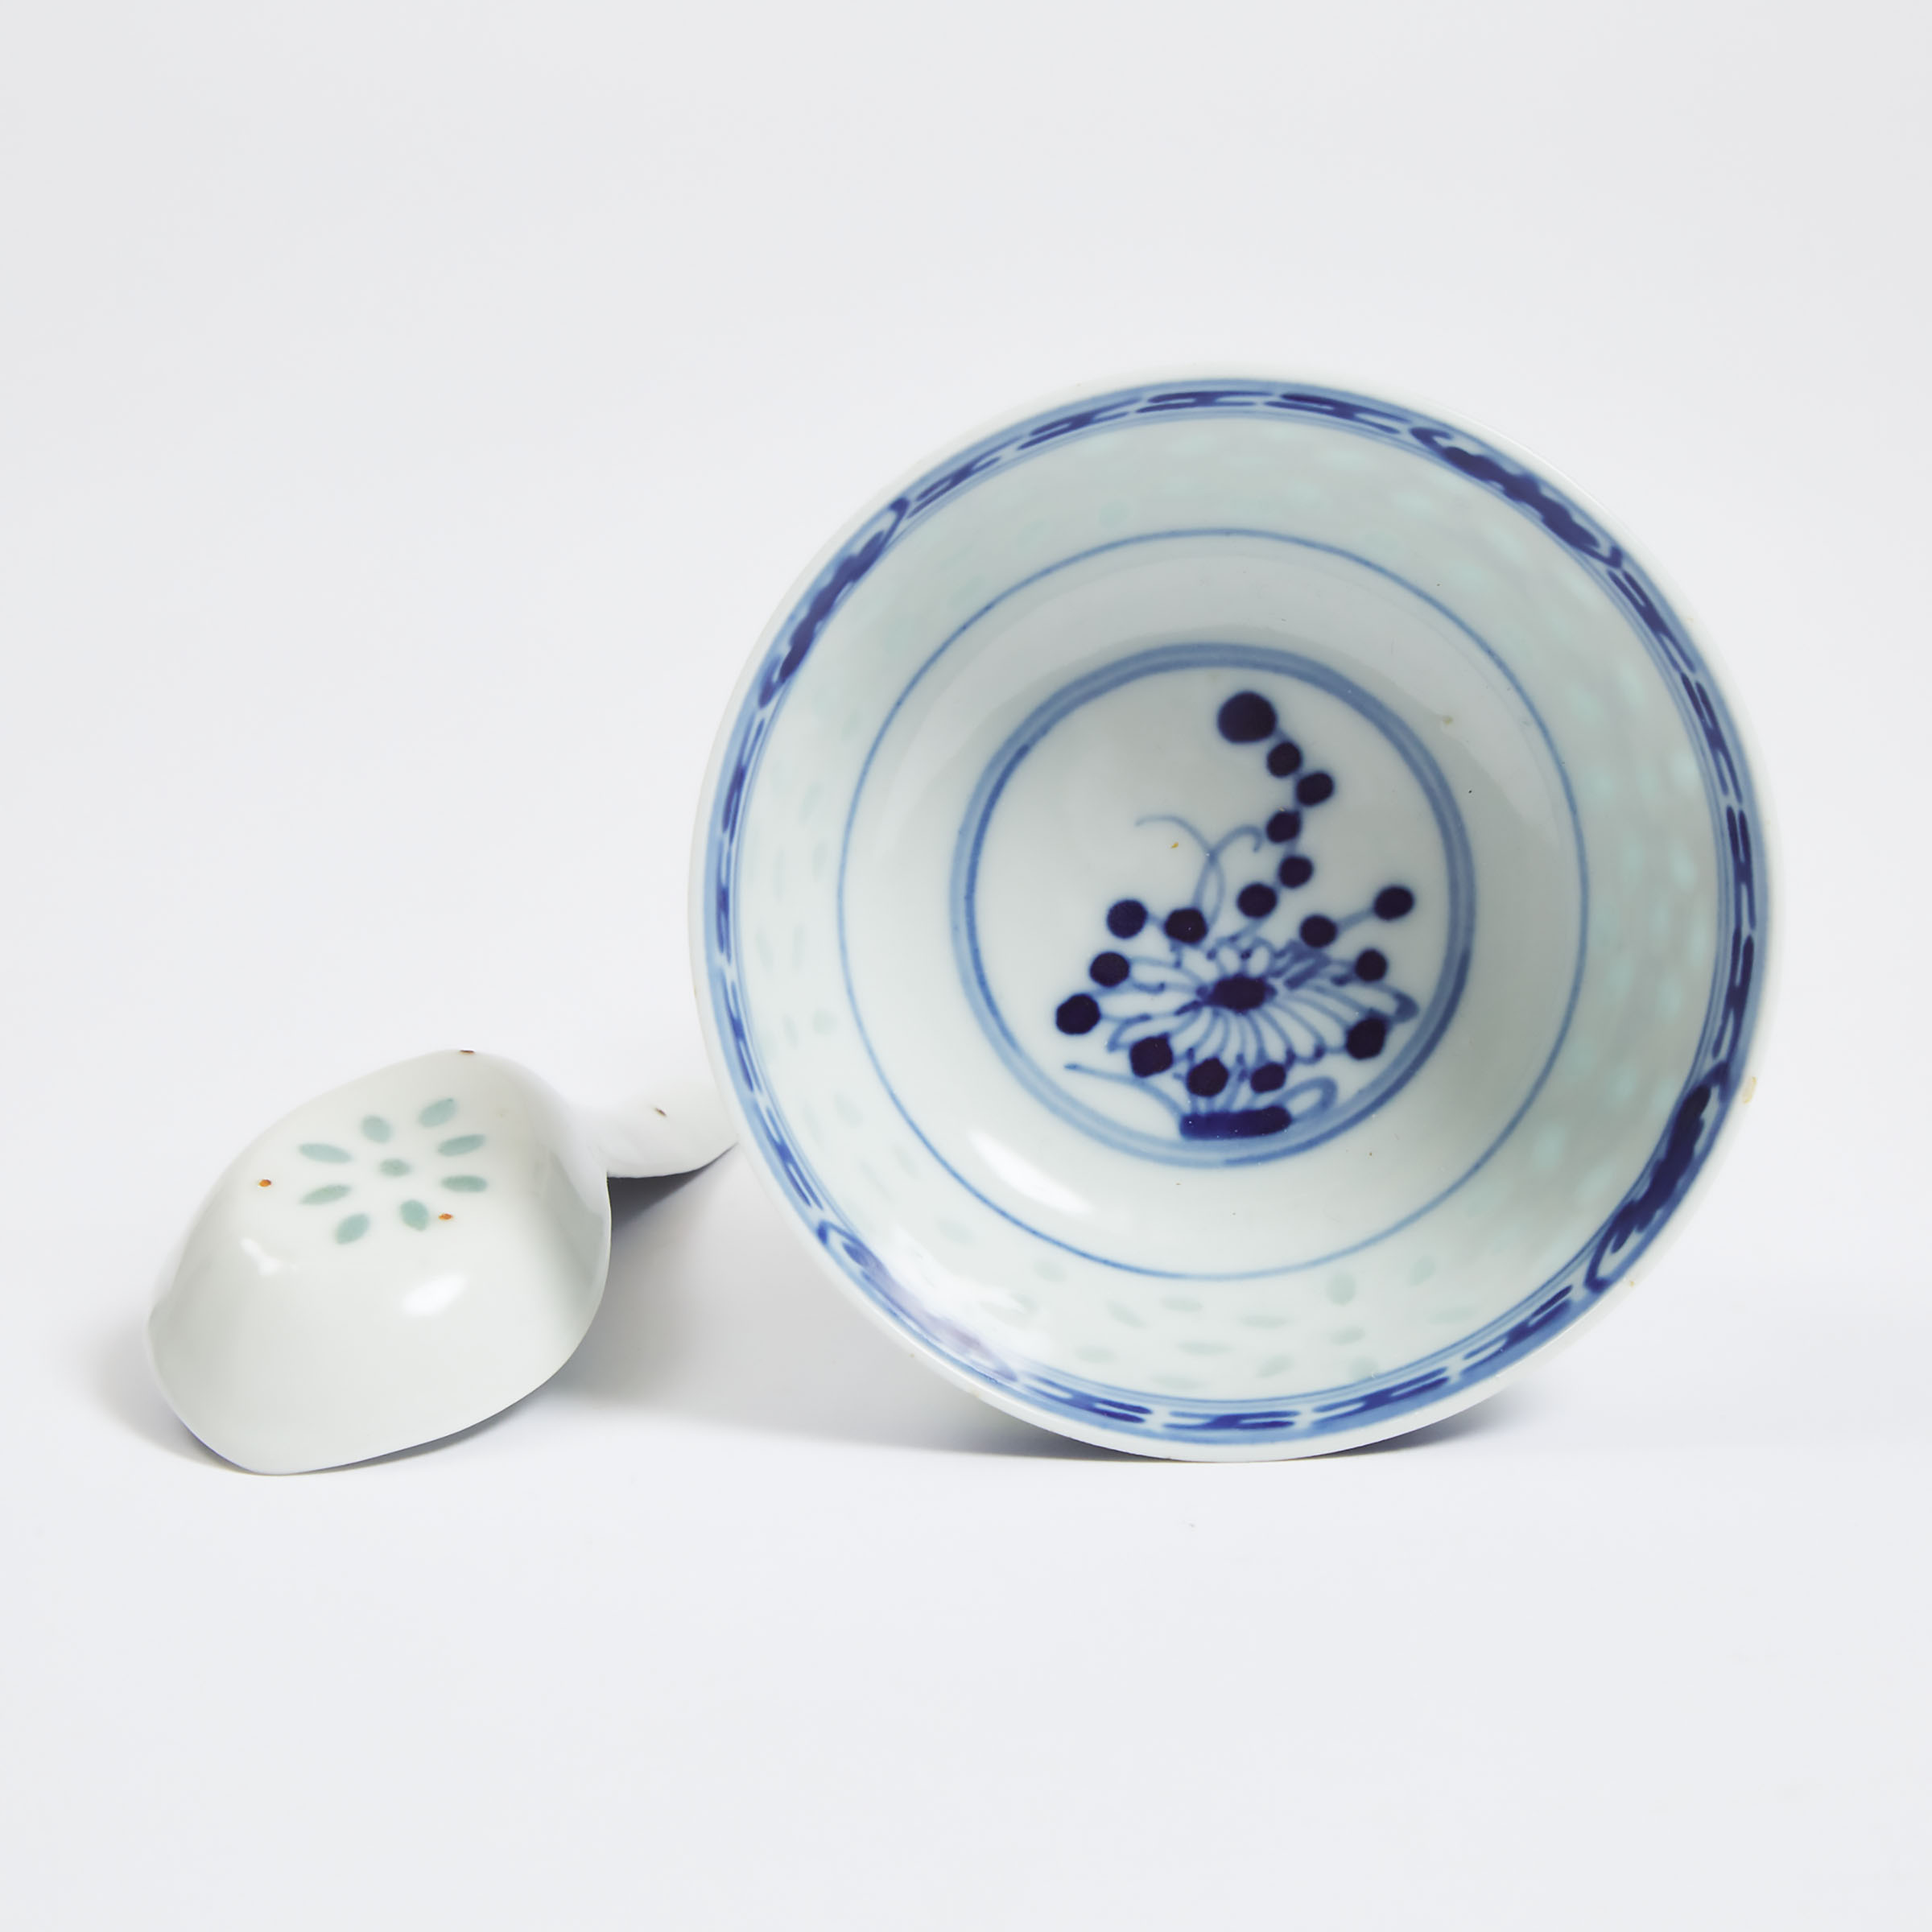 A Chinese Blue and White 'Rice-Grain' Porcelain Bowl with Spoon Set, Late Qing Dynasty/Republican Period, 19th/Early 20th Century